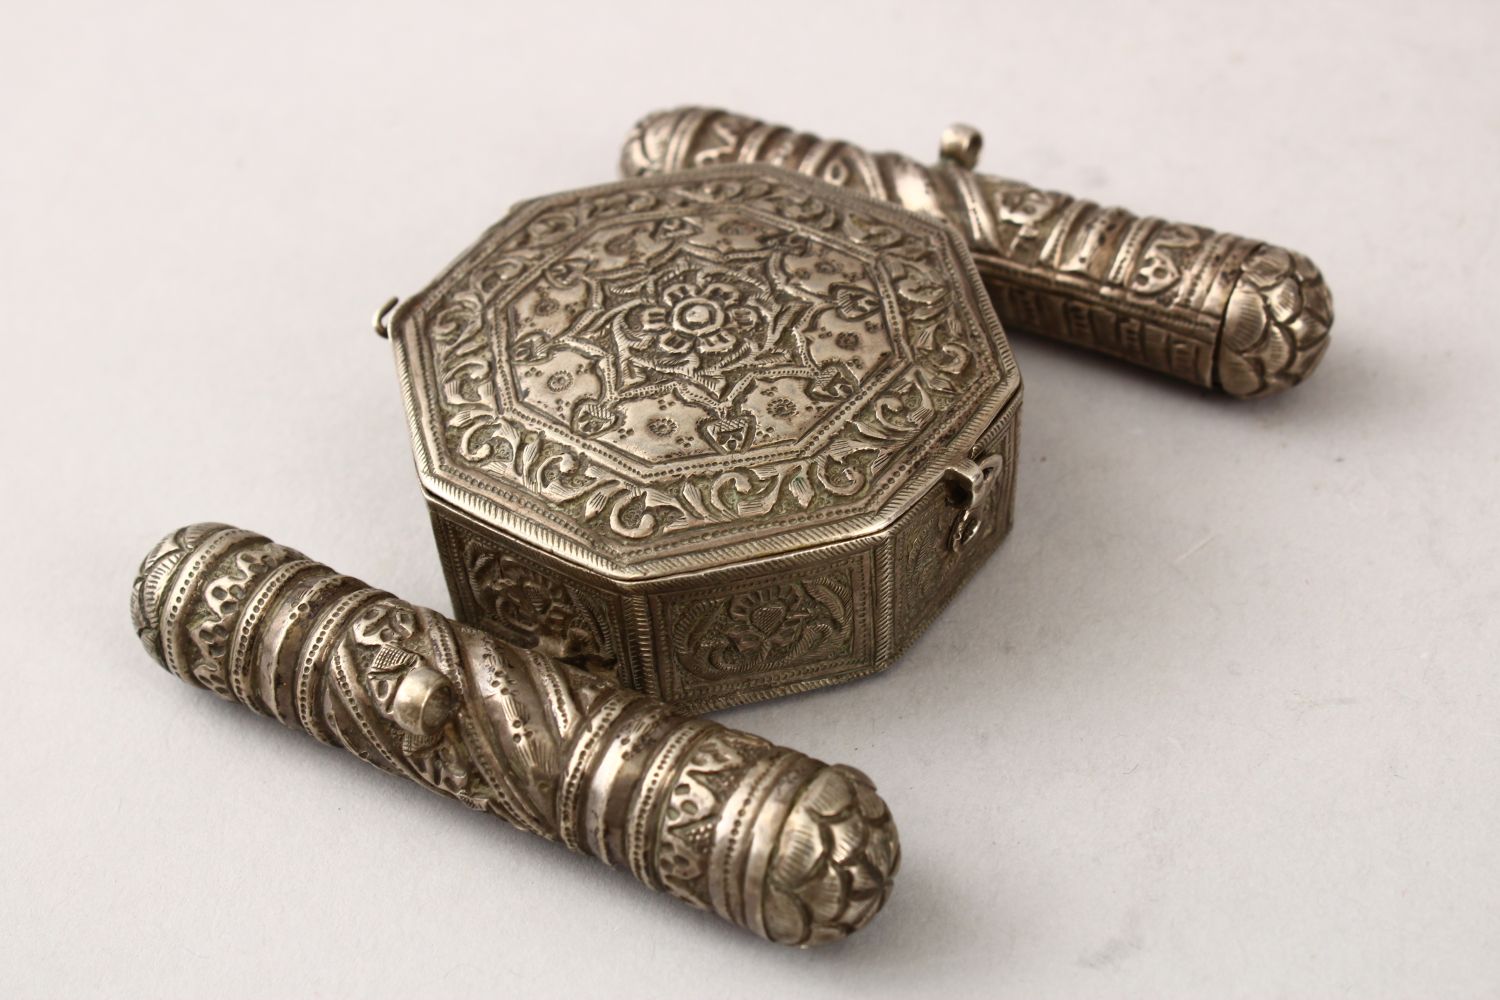 A GOOD CAUCASIAN SILVER BAZBAND AMULET CASE, with embossed decoration, 10cm x 8cm - Image 3 of 8